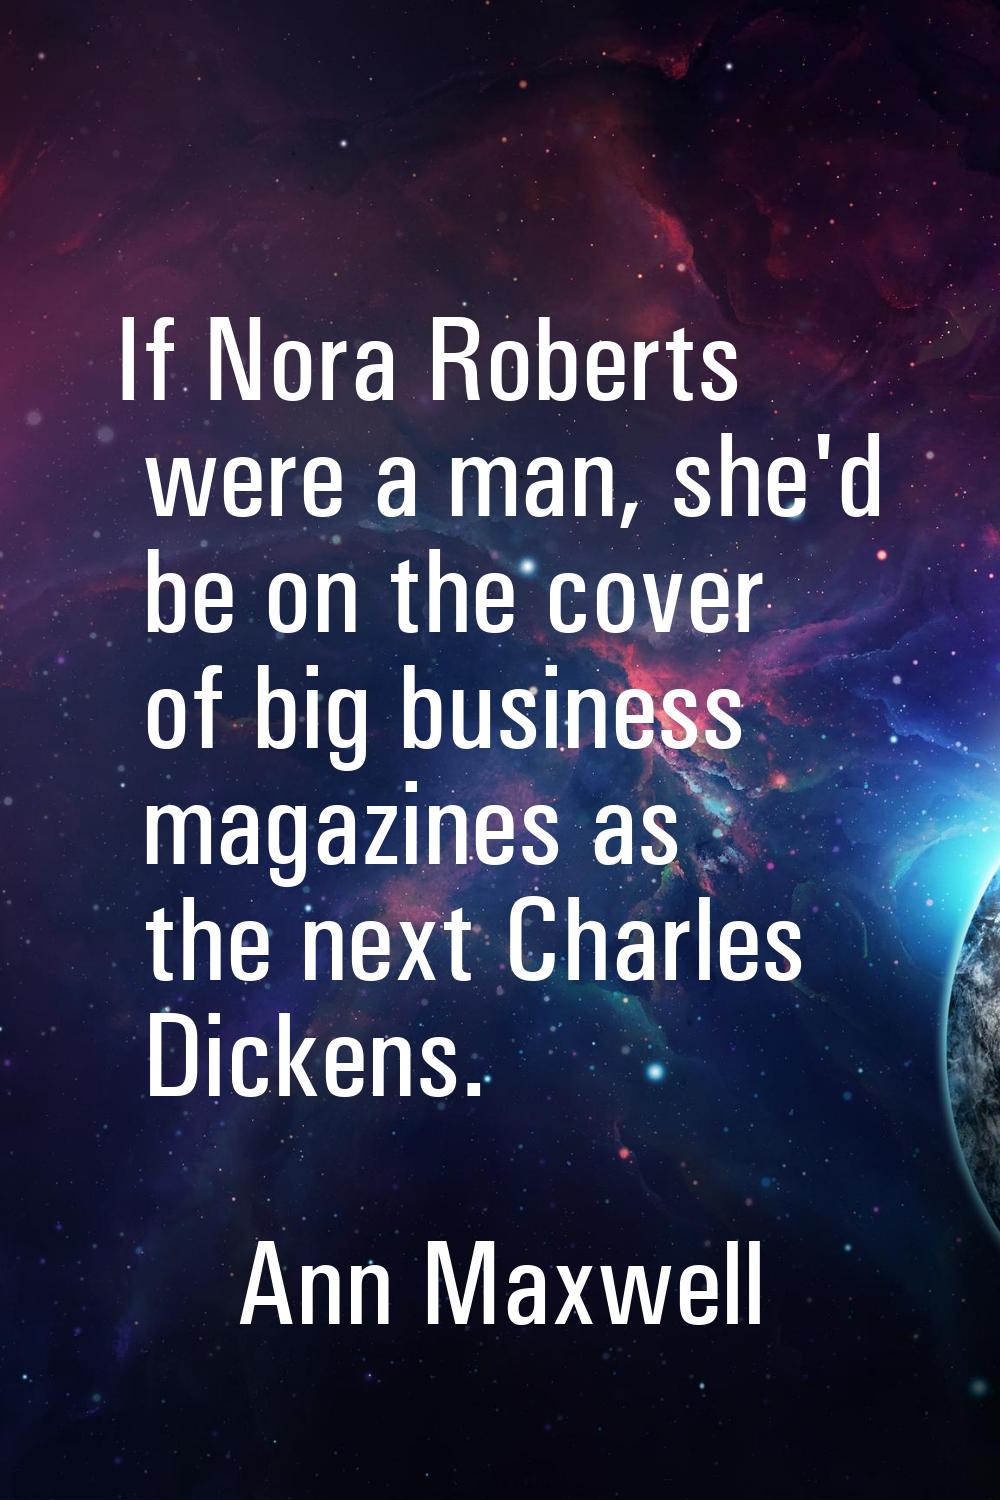 If Nora Roberts were a man, she'd be on the cover of big business magazines as the next Charles Dic